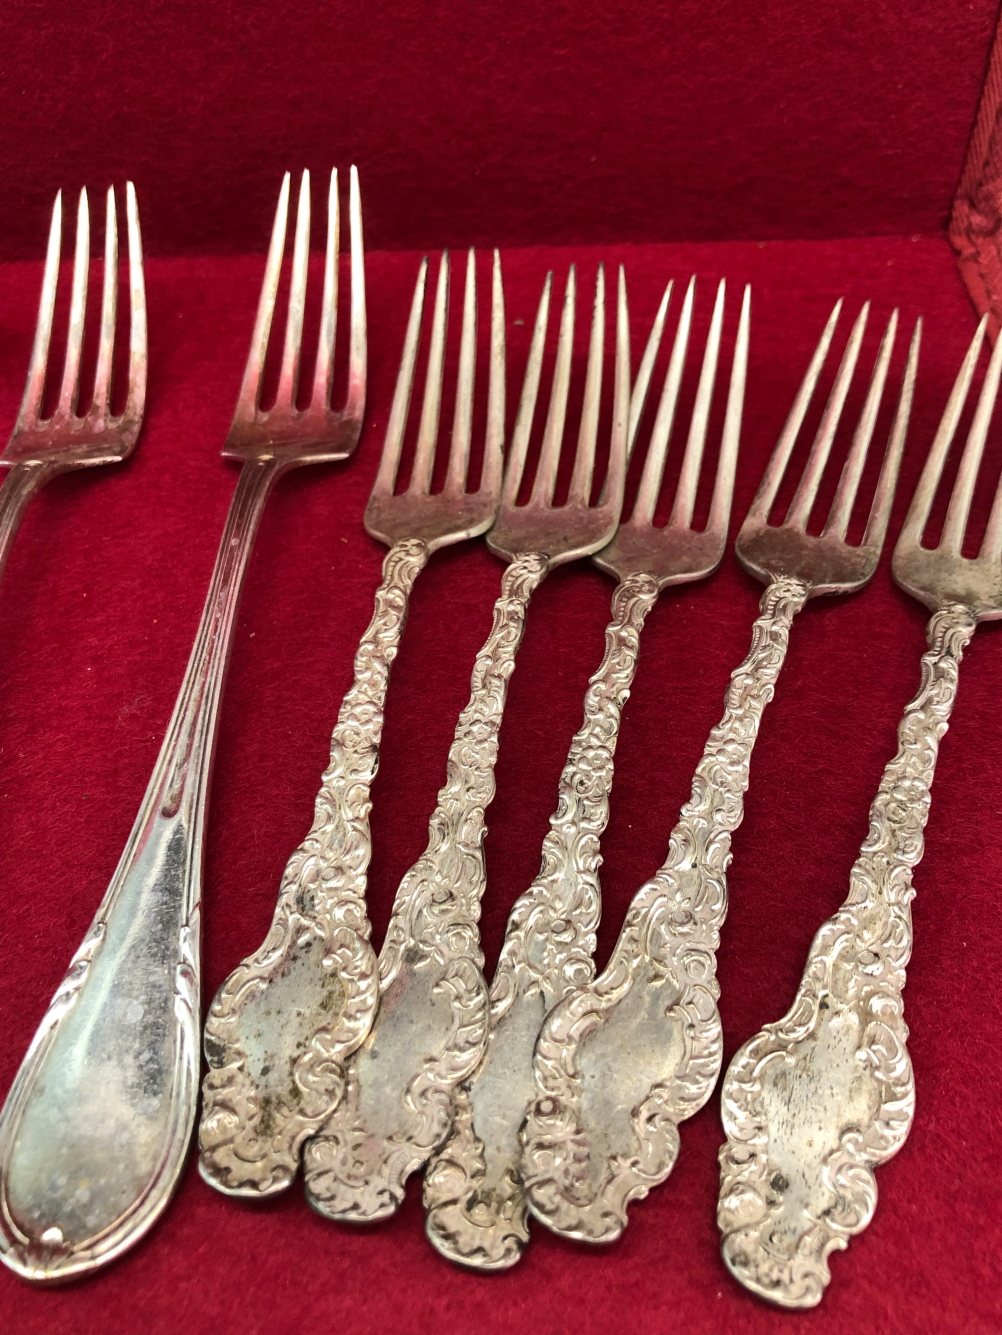 A STERLING SILVER FLORAL CAST PART CUTLERY SET, TWO EUROPEAN SILVER FORKS, 689Gms. TOGETHER WITH A - Image 2 of 5